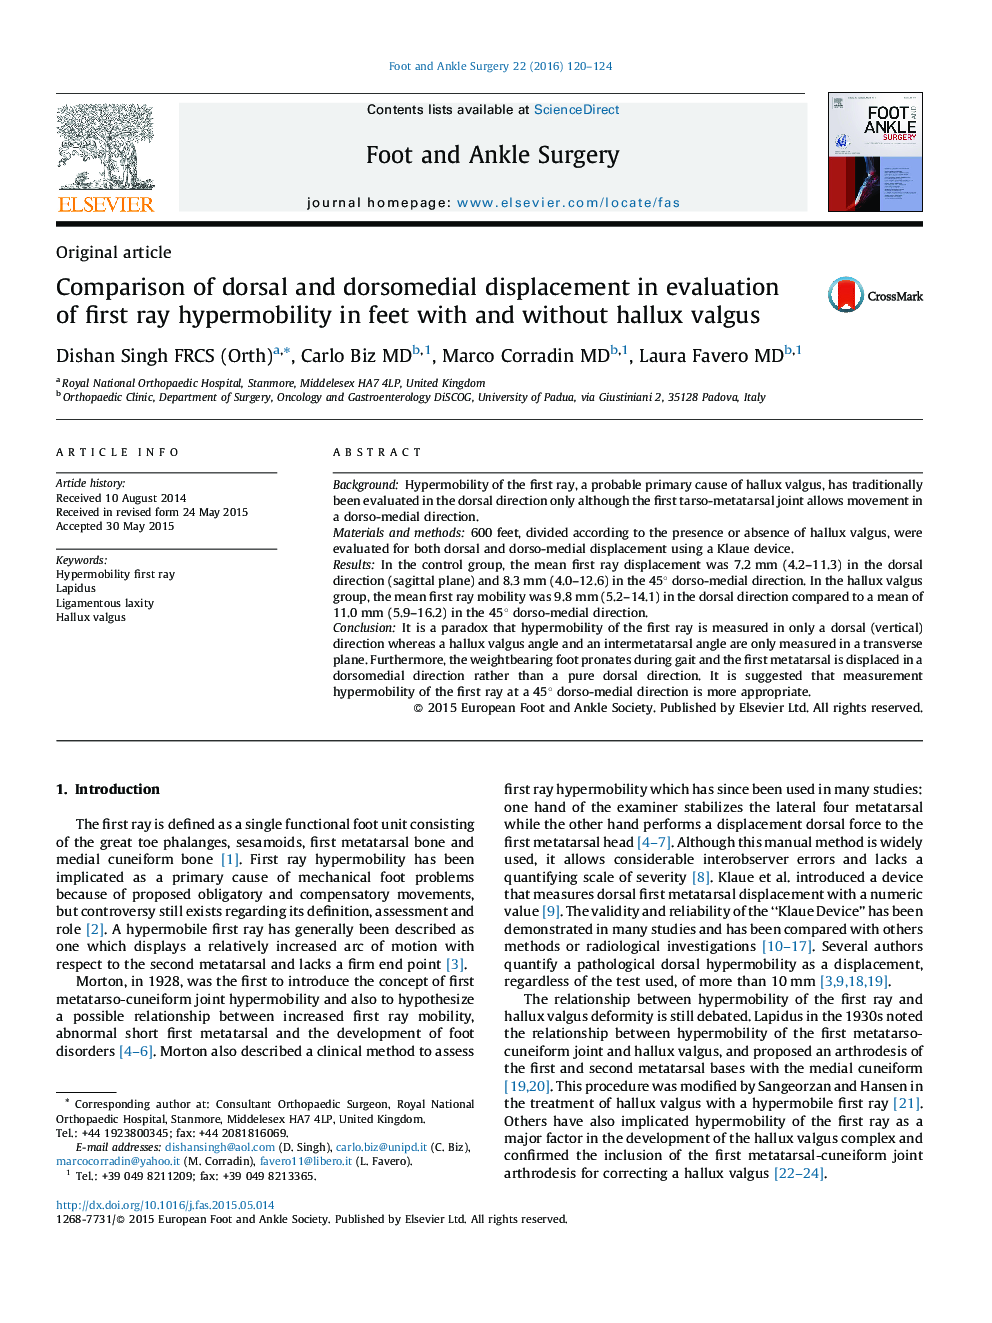 Comparison of dorsal and dorsomedial displacement in evaluation of first ray hypermobility in feet with and without hallux valgus